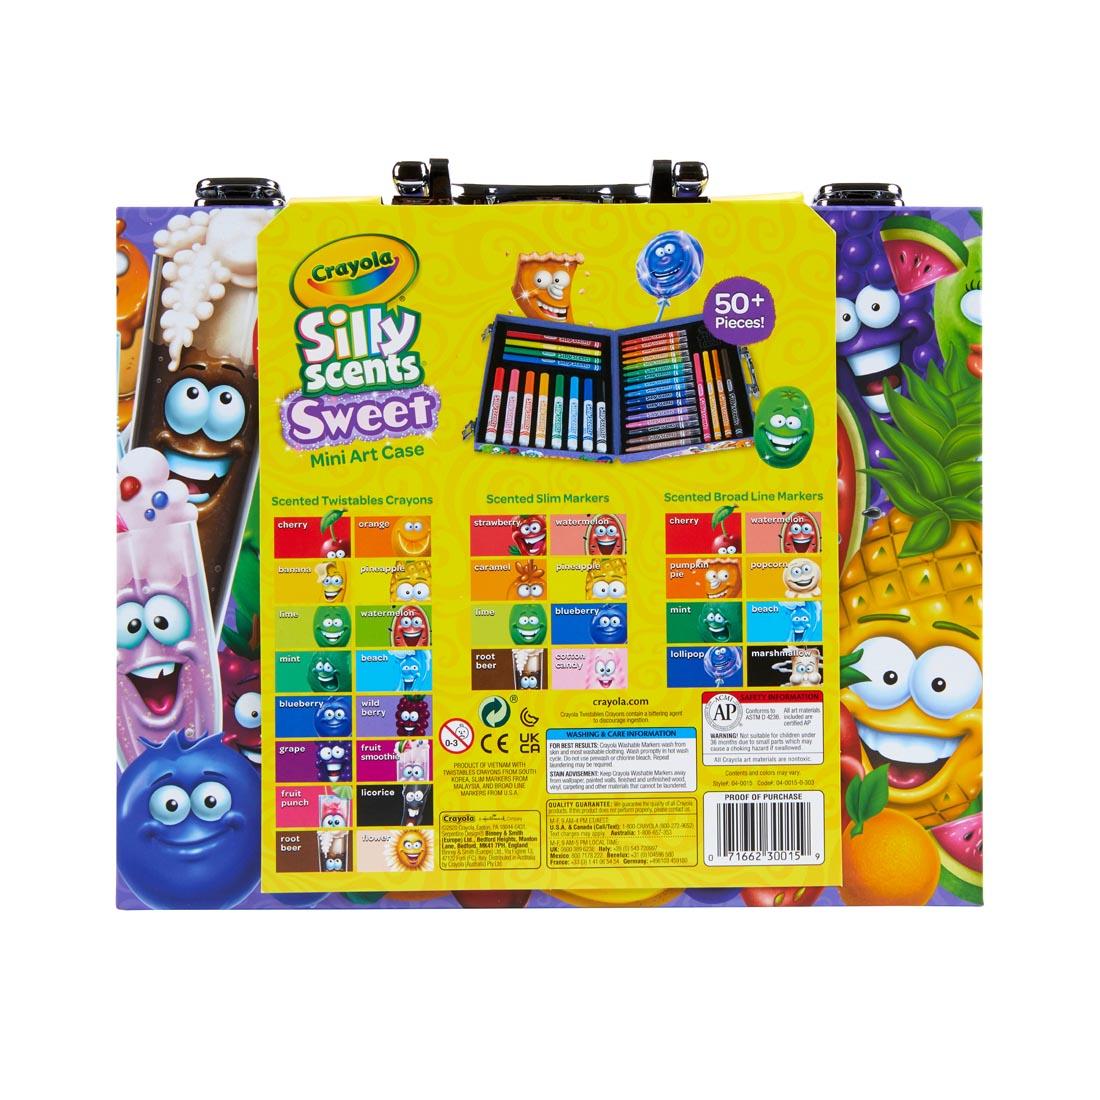 Back of package of the Crayola Silly Scents Sweet Mini Art Case